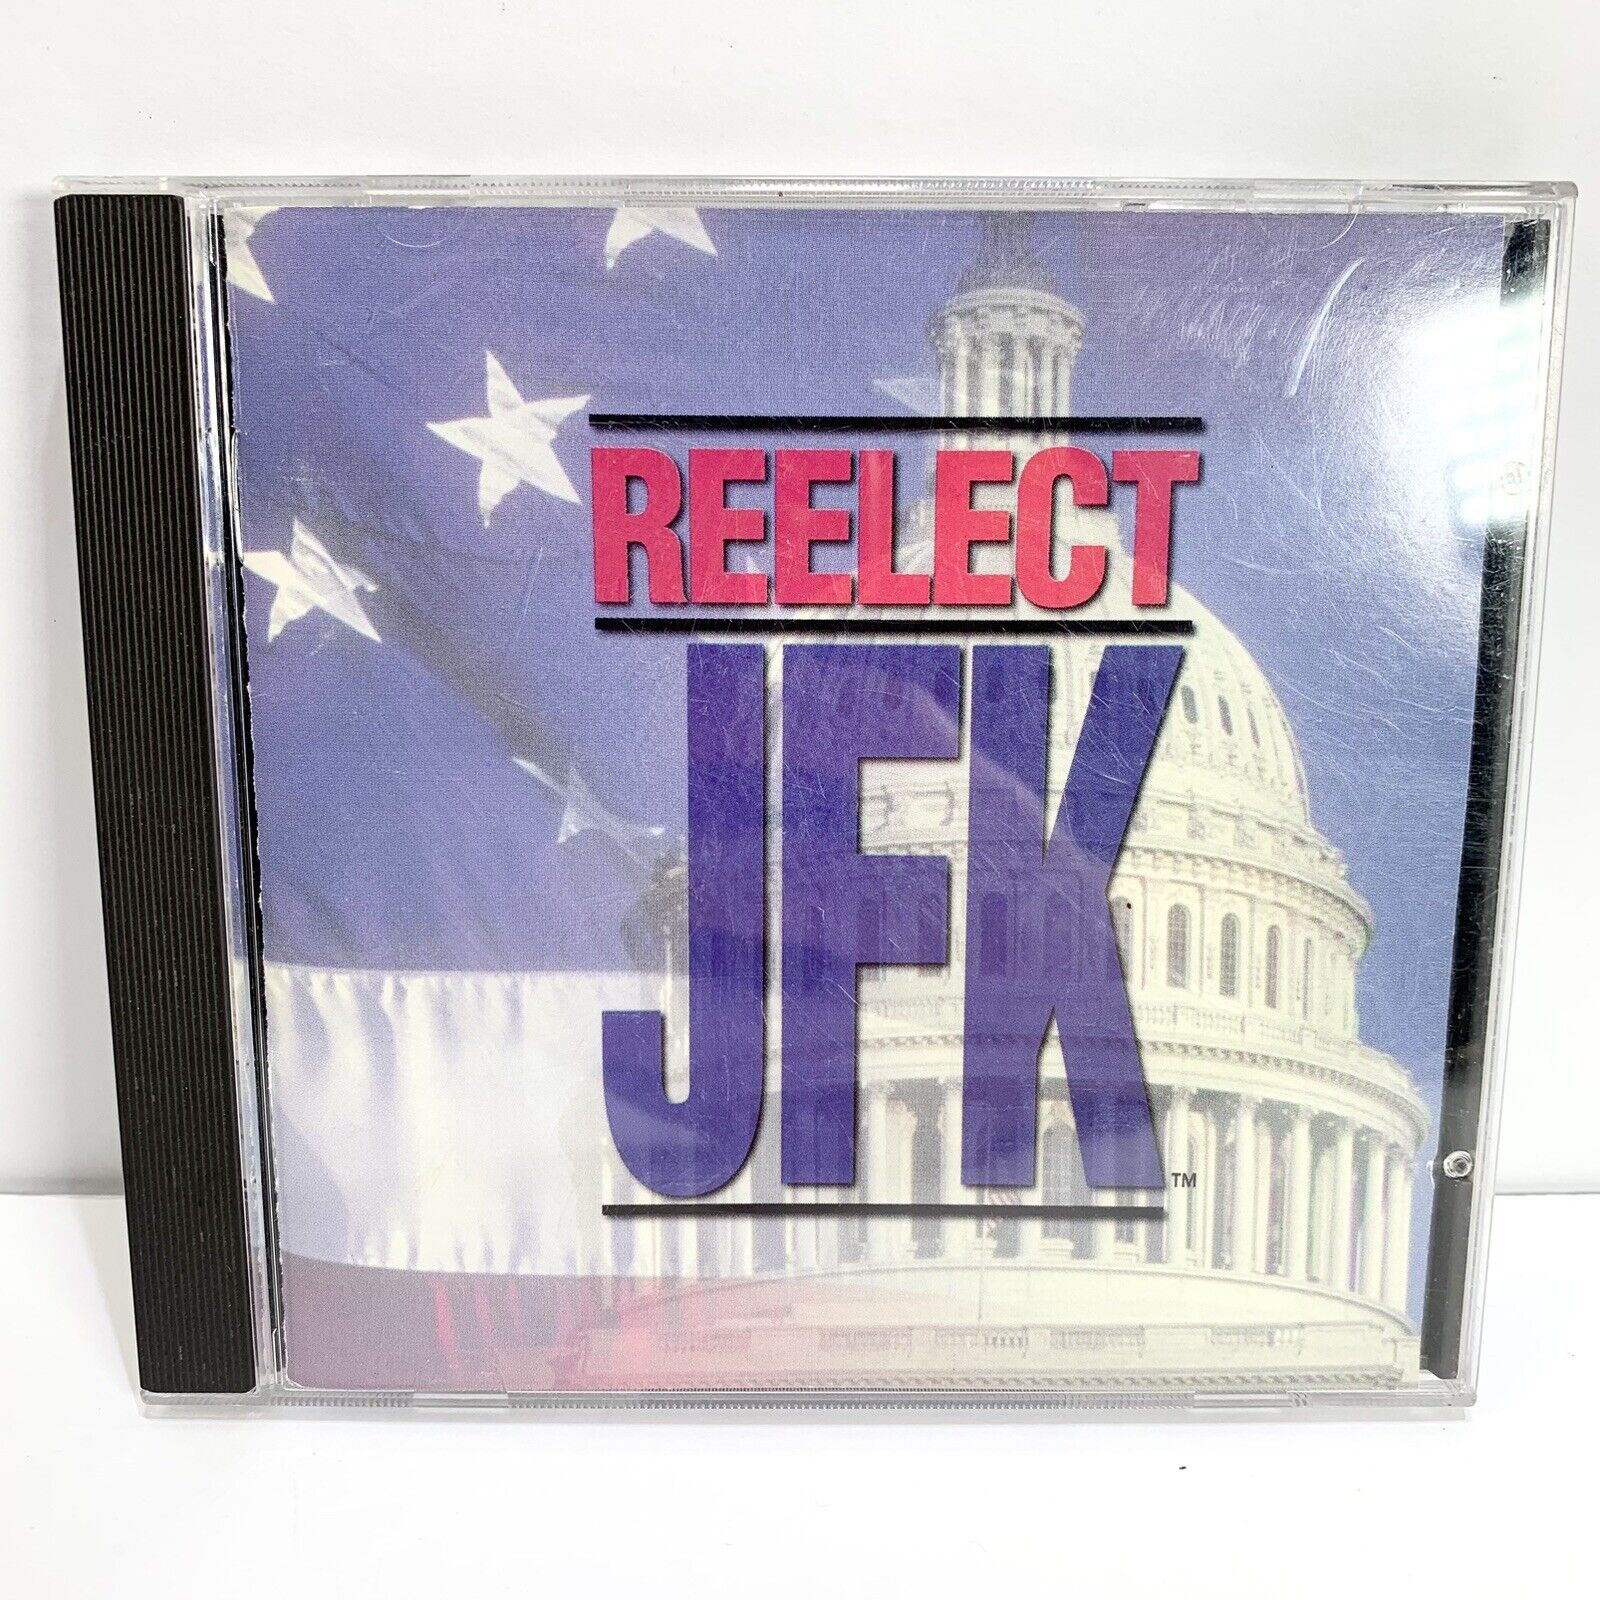 Re-Elect JFK CD-ROM for Mac & Windows Vintage Rare PC Game 1995 Reelect Software